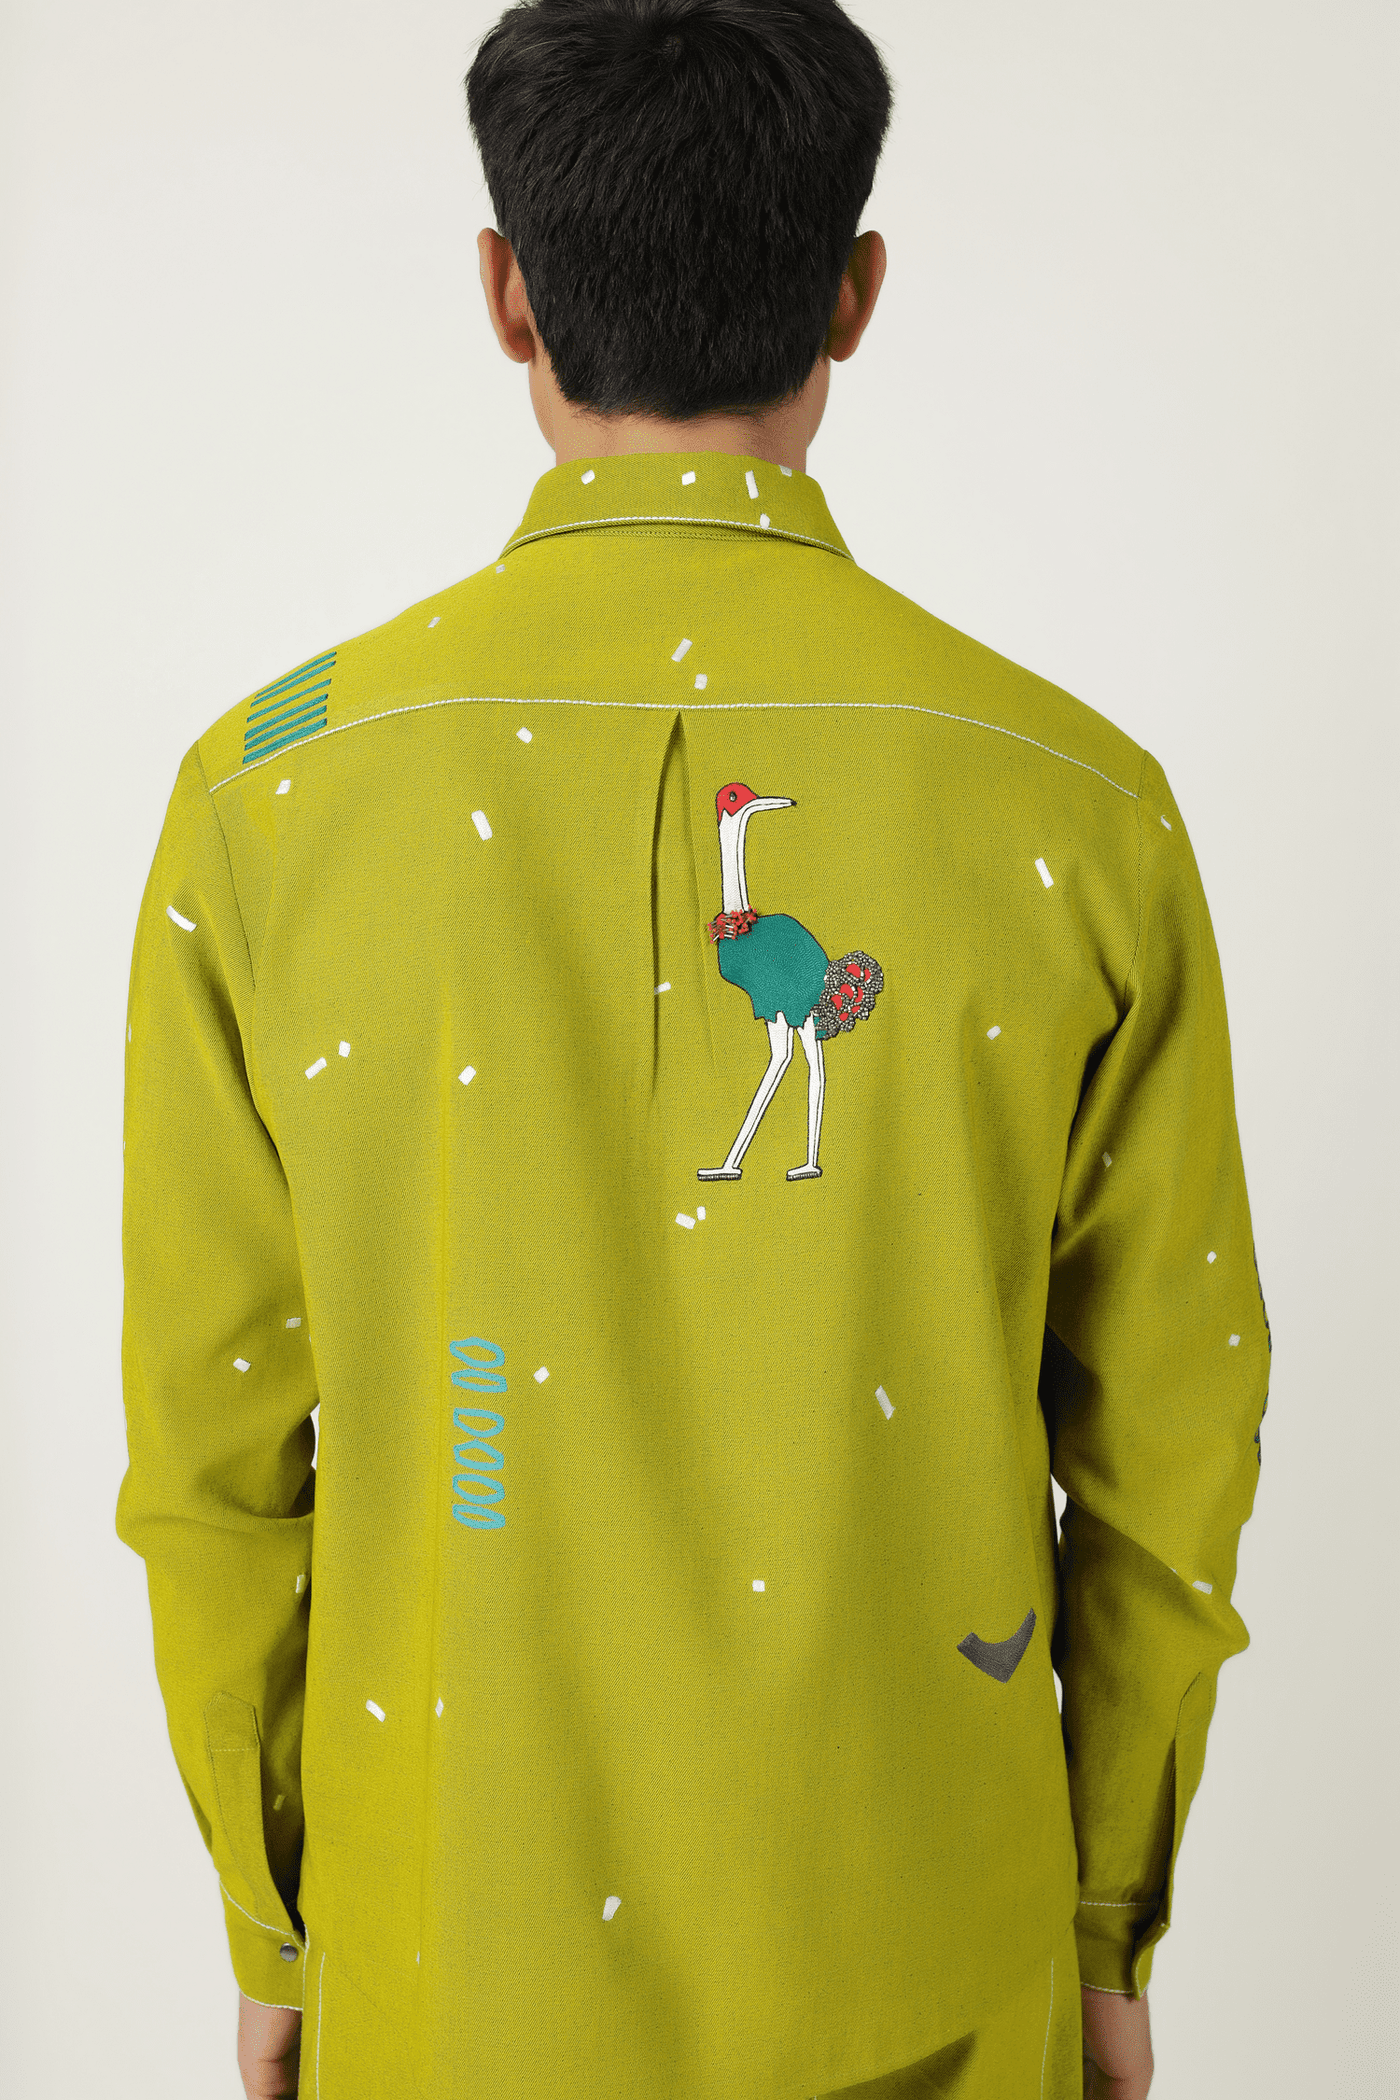 Abstract Shapes And Ostrich Shirt With Pants